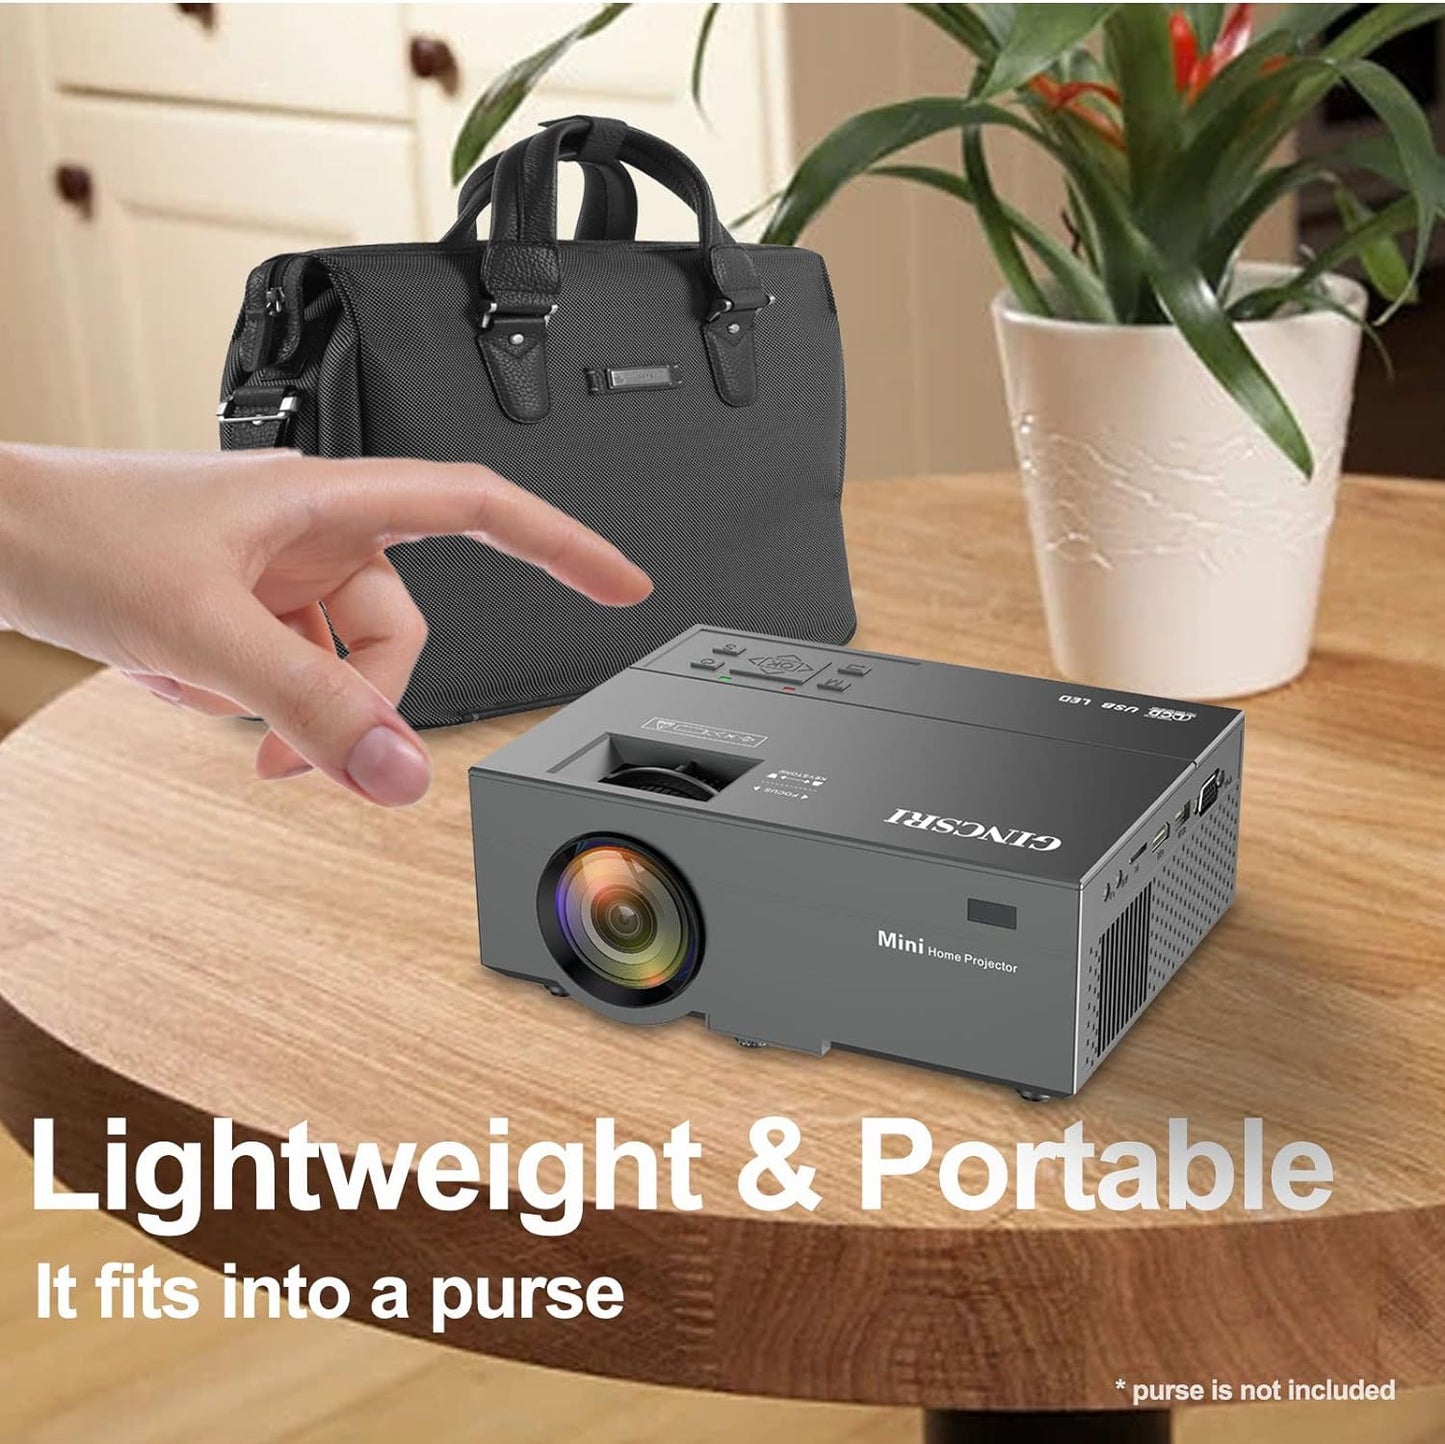 GINCSRI mini Projector for iphone HD 1080P video projectors 10000 Lumens 200" home Movie Projector small portable TV proyector portatil outdoor projectir with speakers Tripod Carry Bag HDMI USB